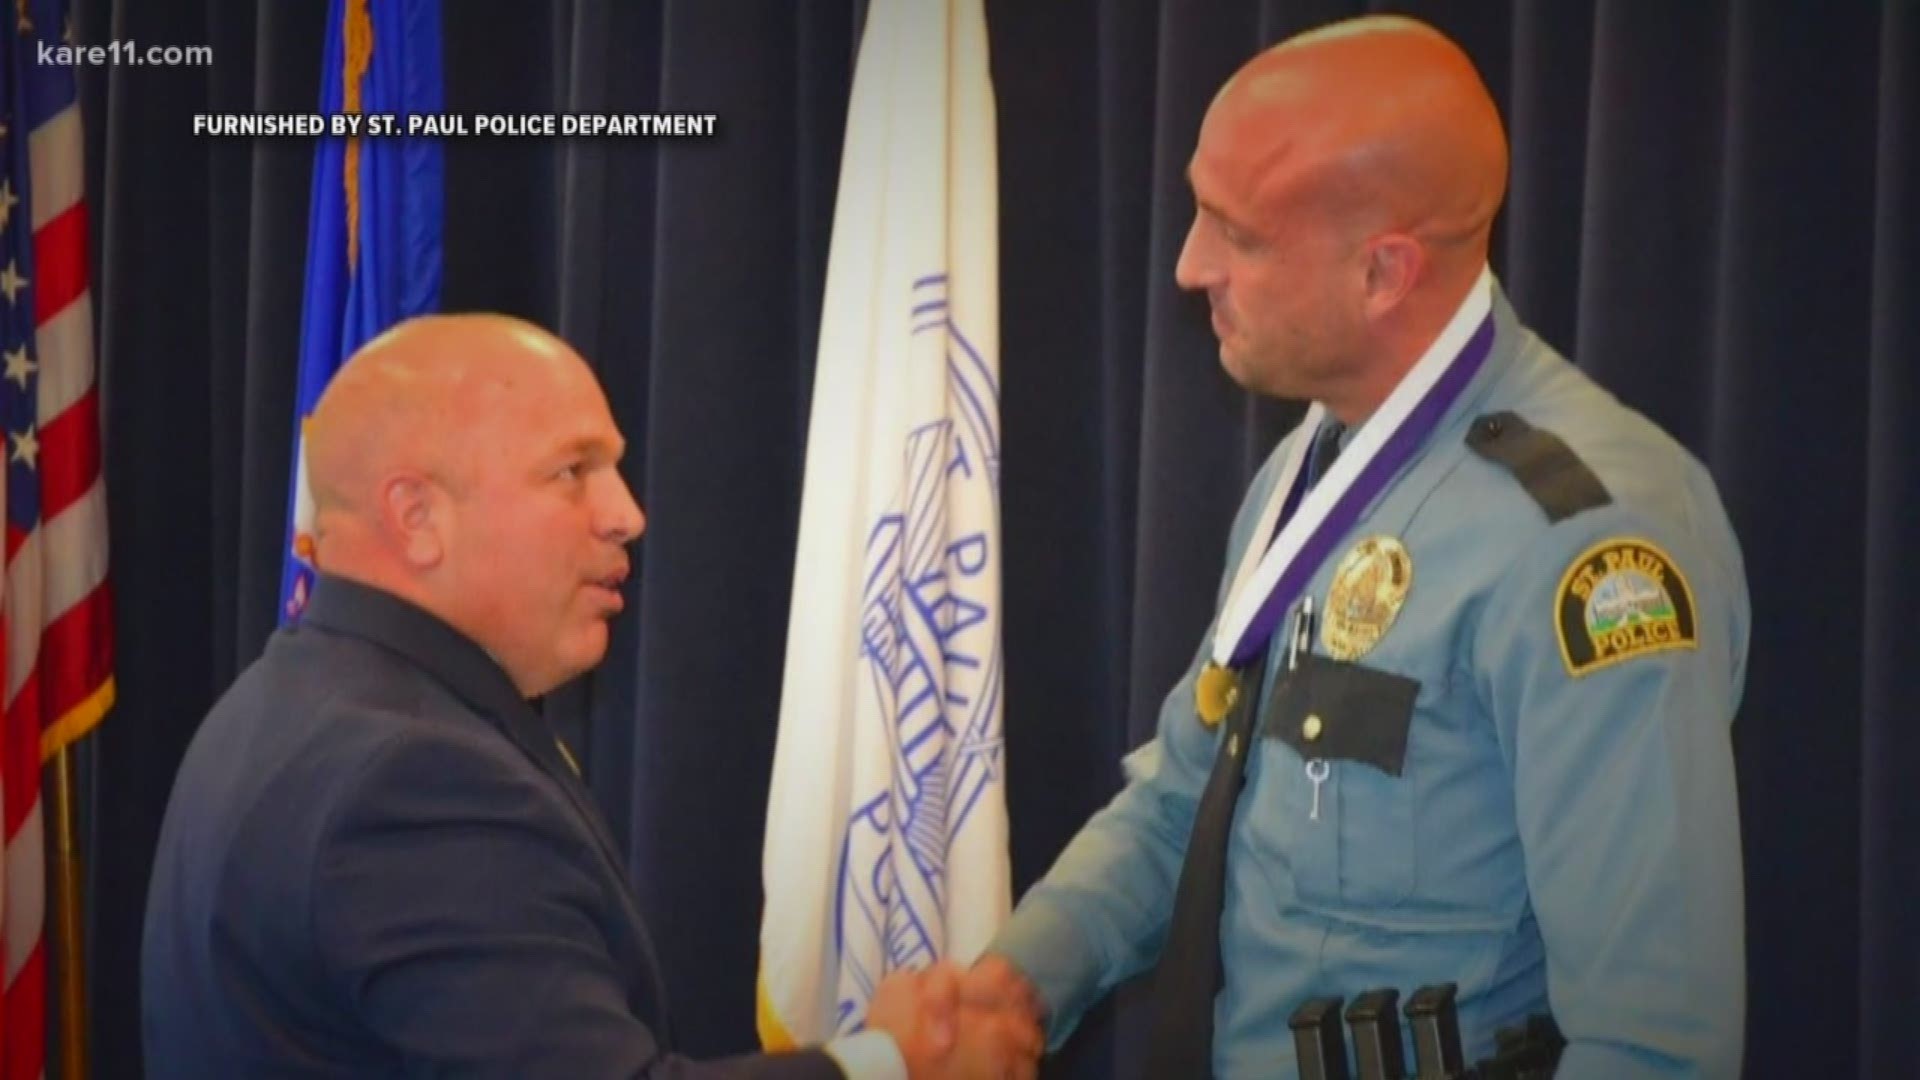 As May comes to end so does mental health awareness month.  
But the talks don’t have to end. Earlier this month, a St. Paul Police Officer was honored for saving the life of a shooting victim.
But he said that life he saved changed him.